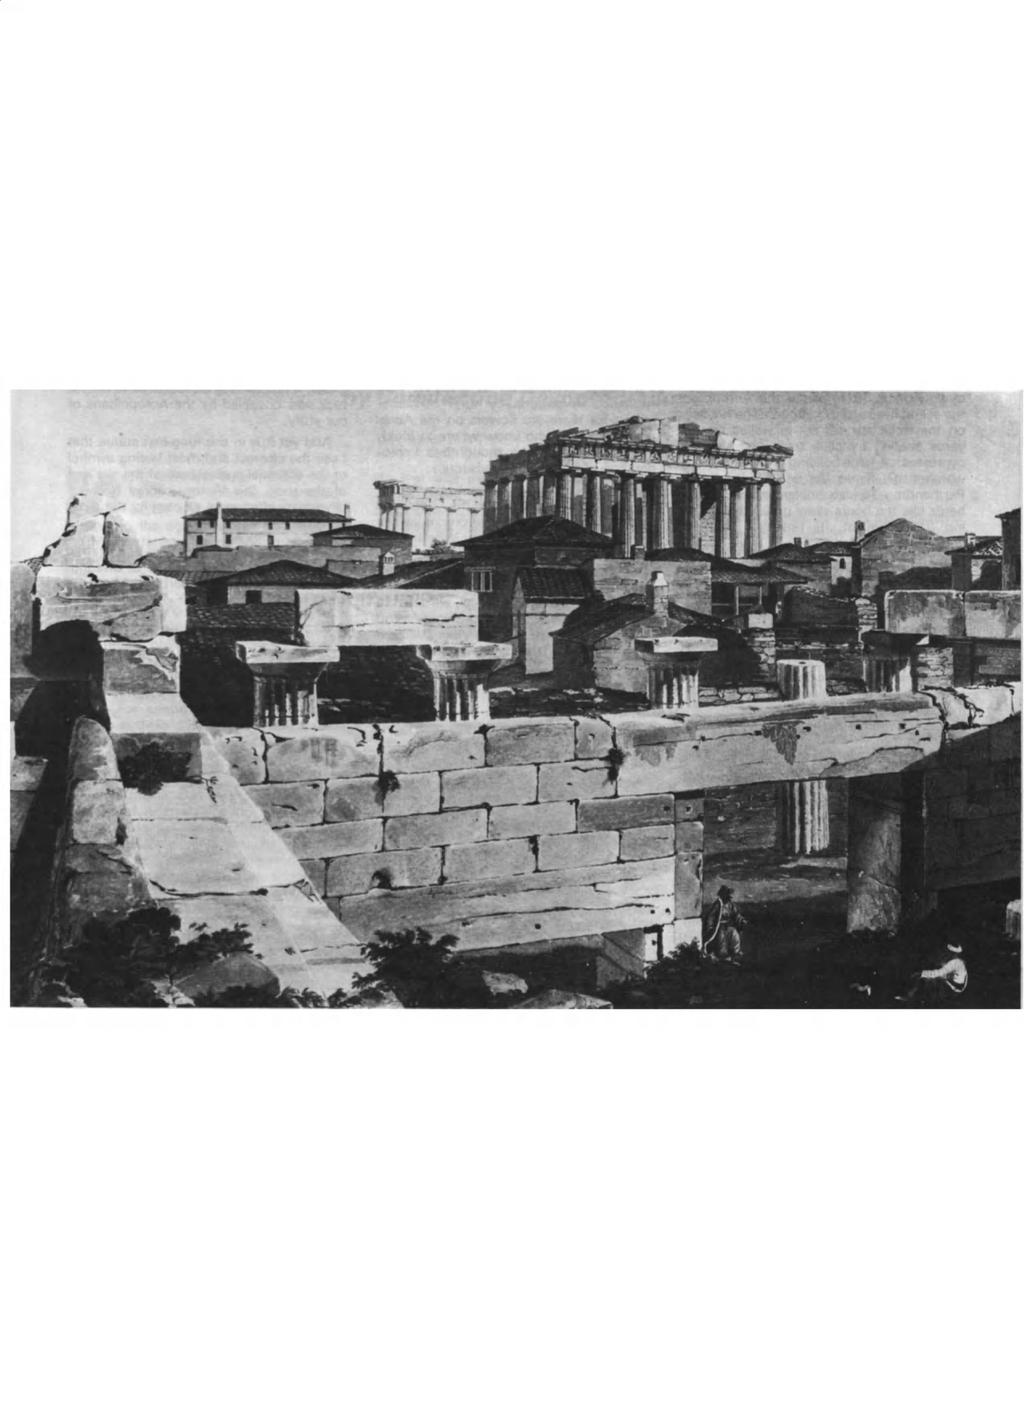 A cluster of roofs surrounds the blasted shell of the Parthenon in this early 19th-century depiction of the Acropolis by the English traveller Edward Dodwell.